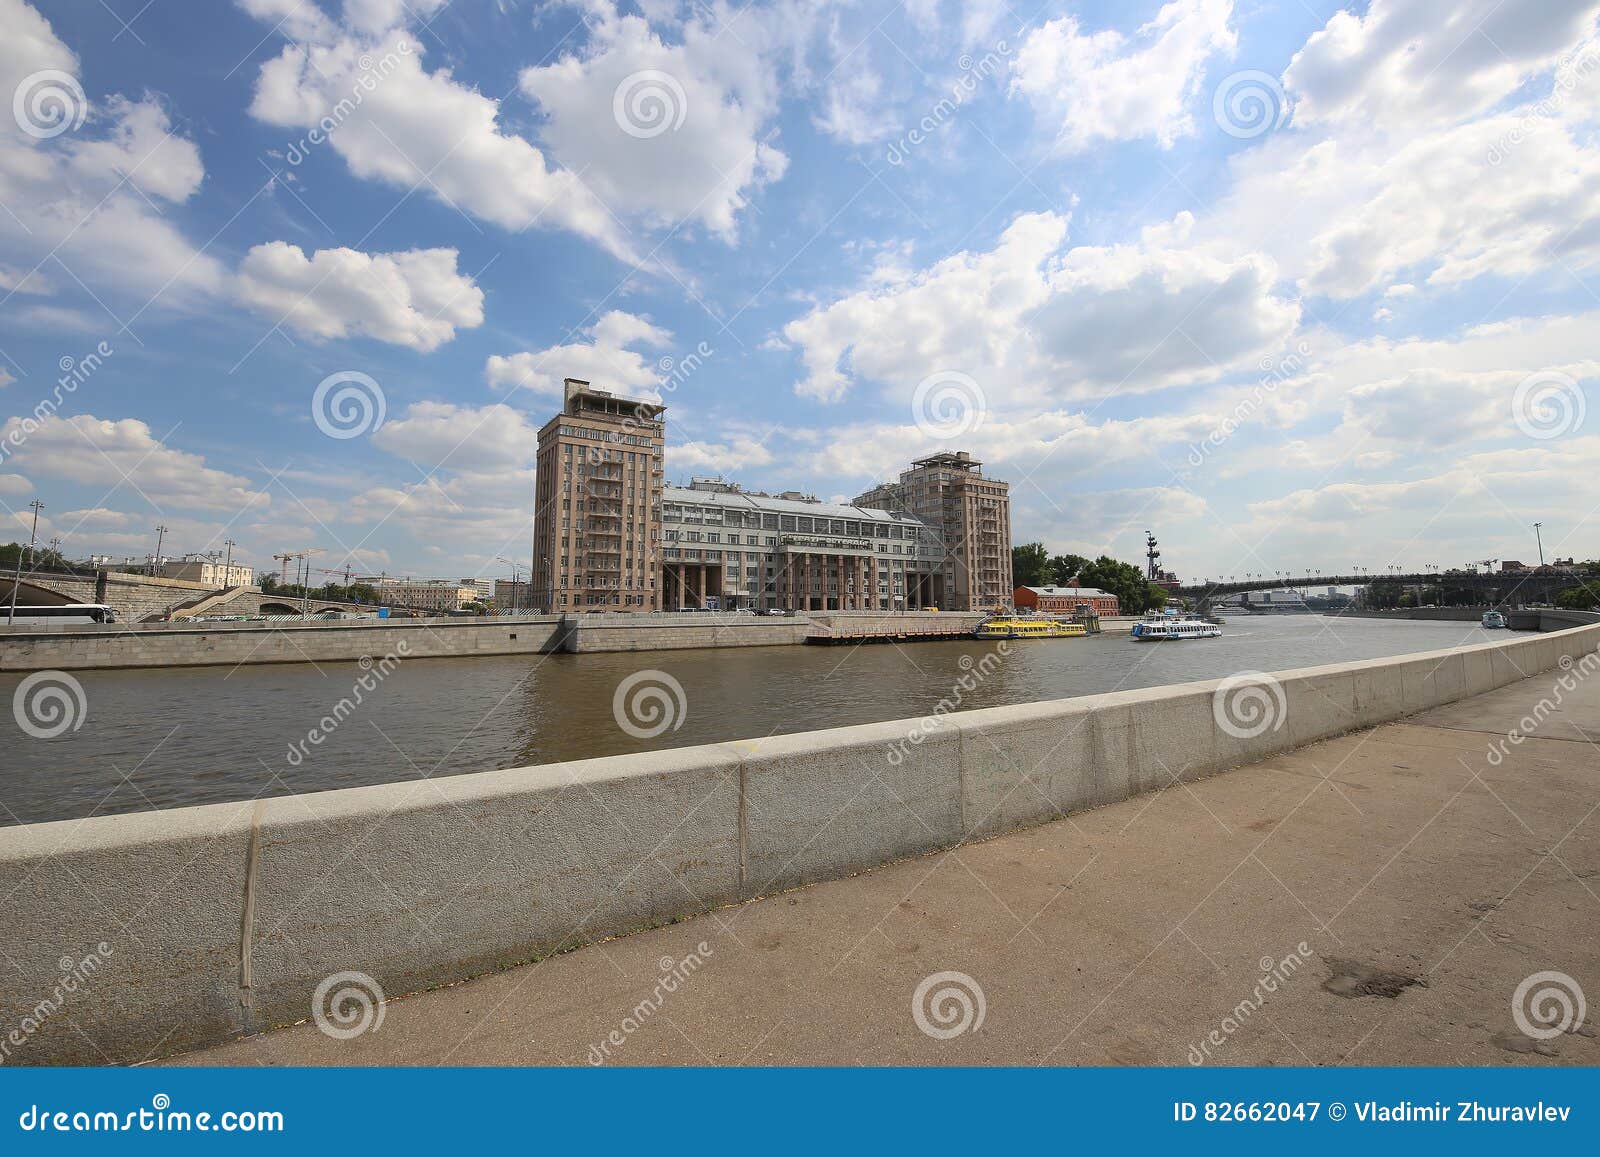 house on the embankment with the state estrada theatre inscription in russian.center of moscow, russia